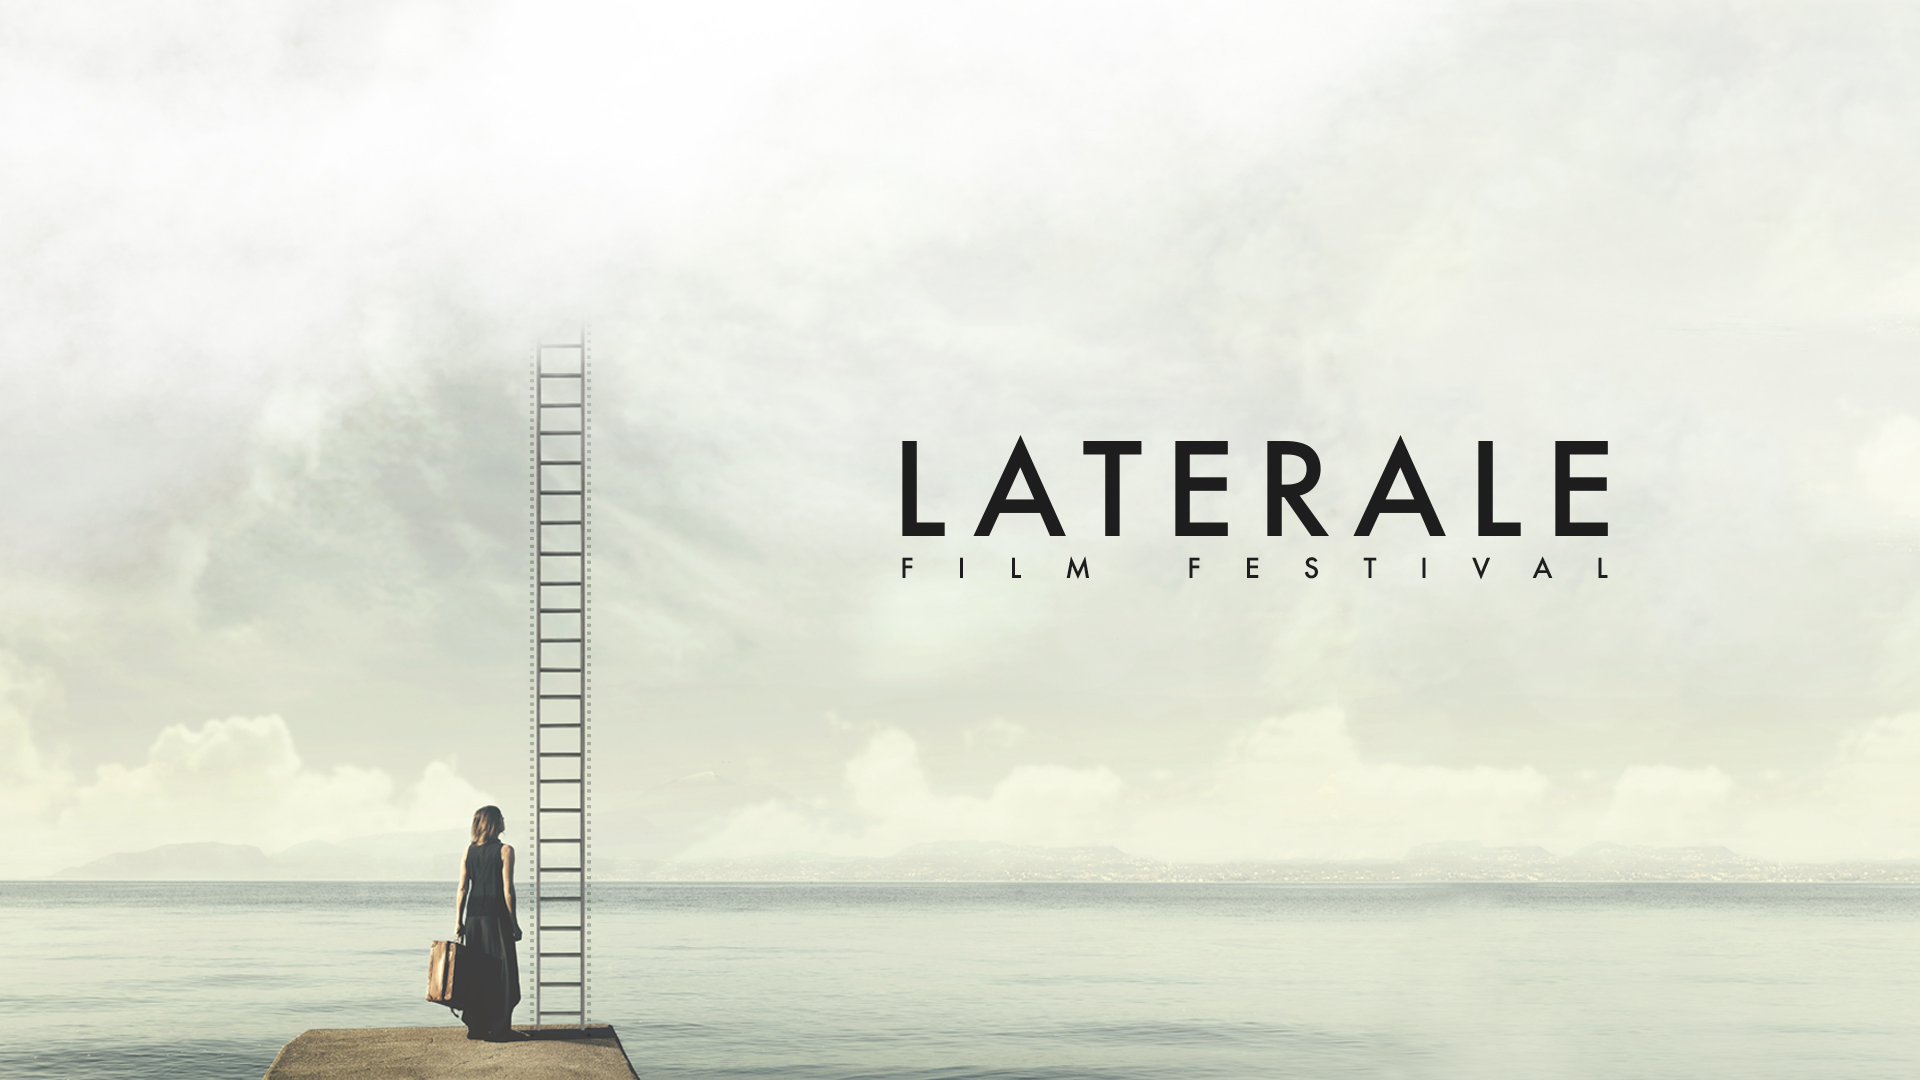 Laterale-1920x1080-text